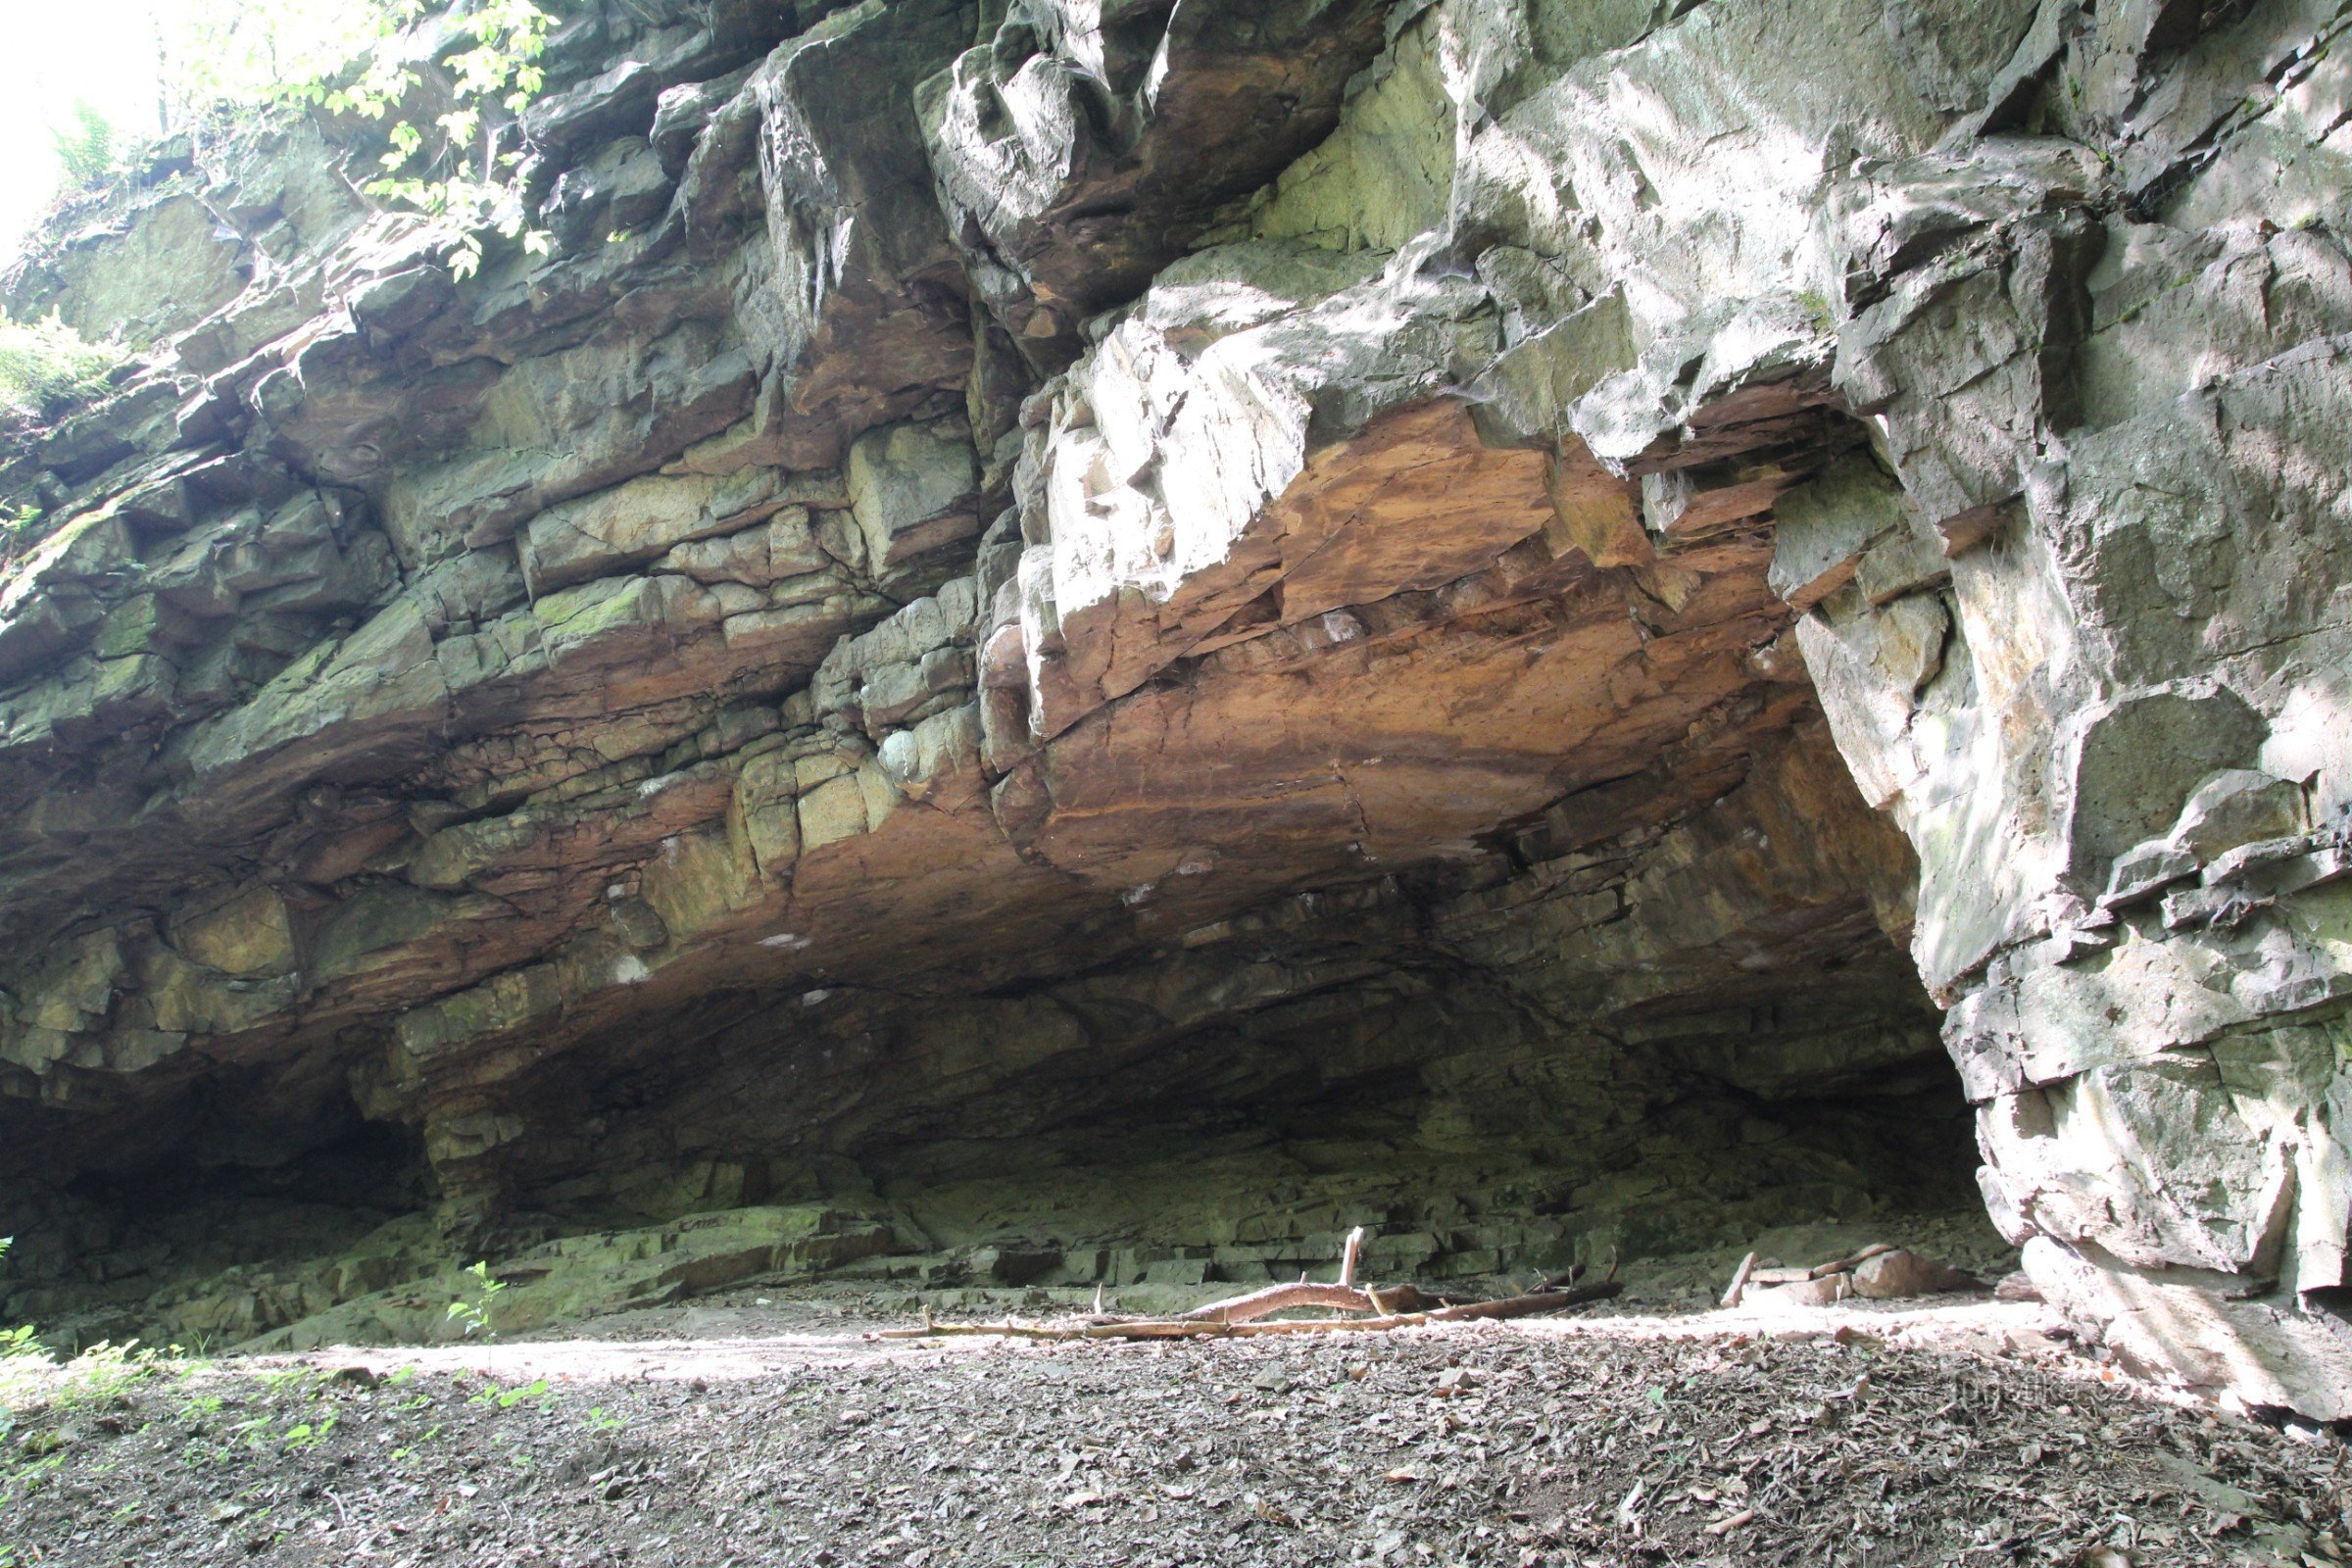 Detail of the rock wall above the cave